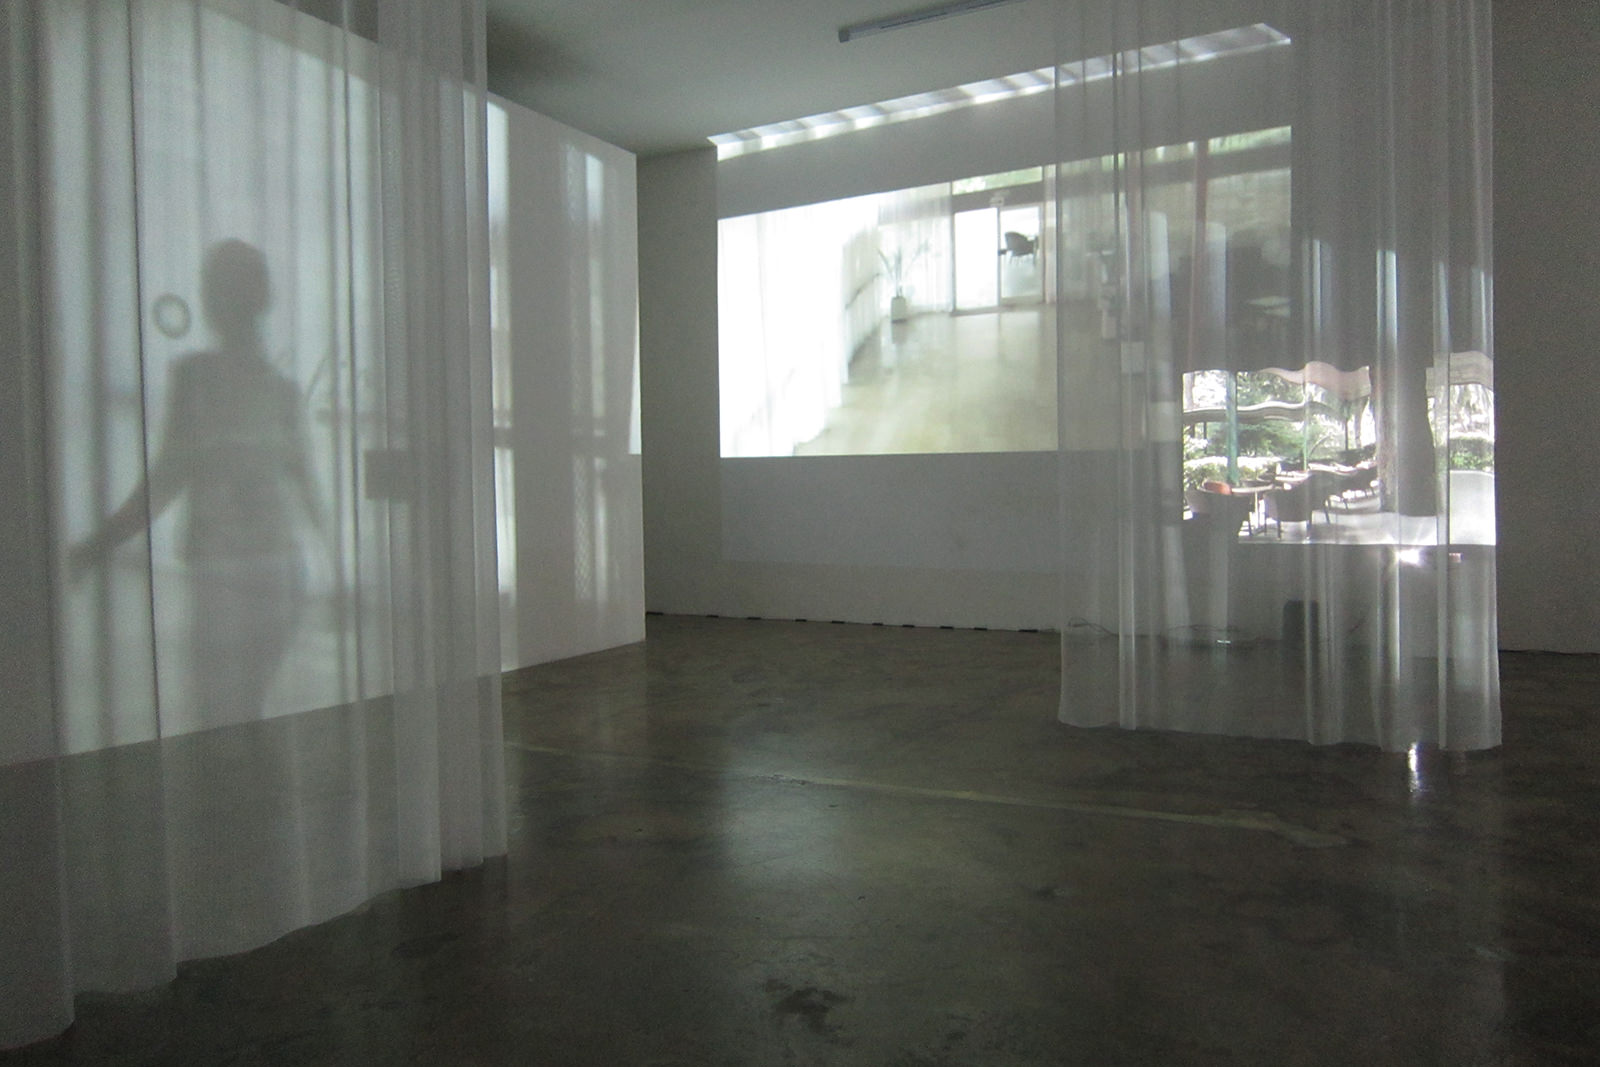 You are currently viewing Iris Meder & Andrea Seidling